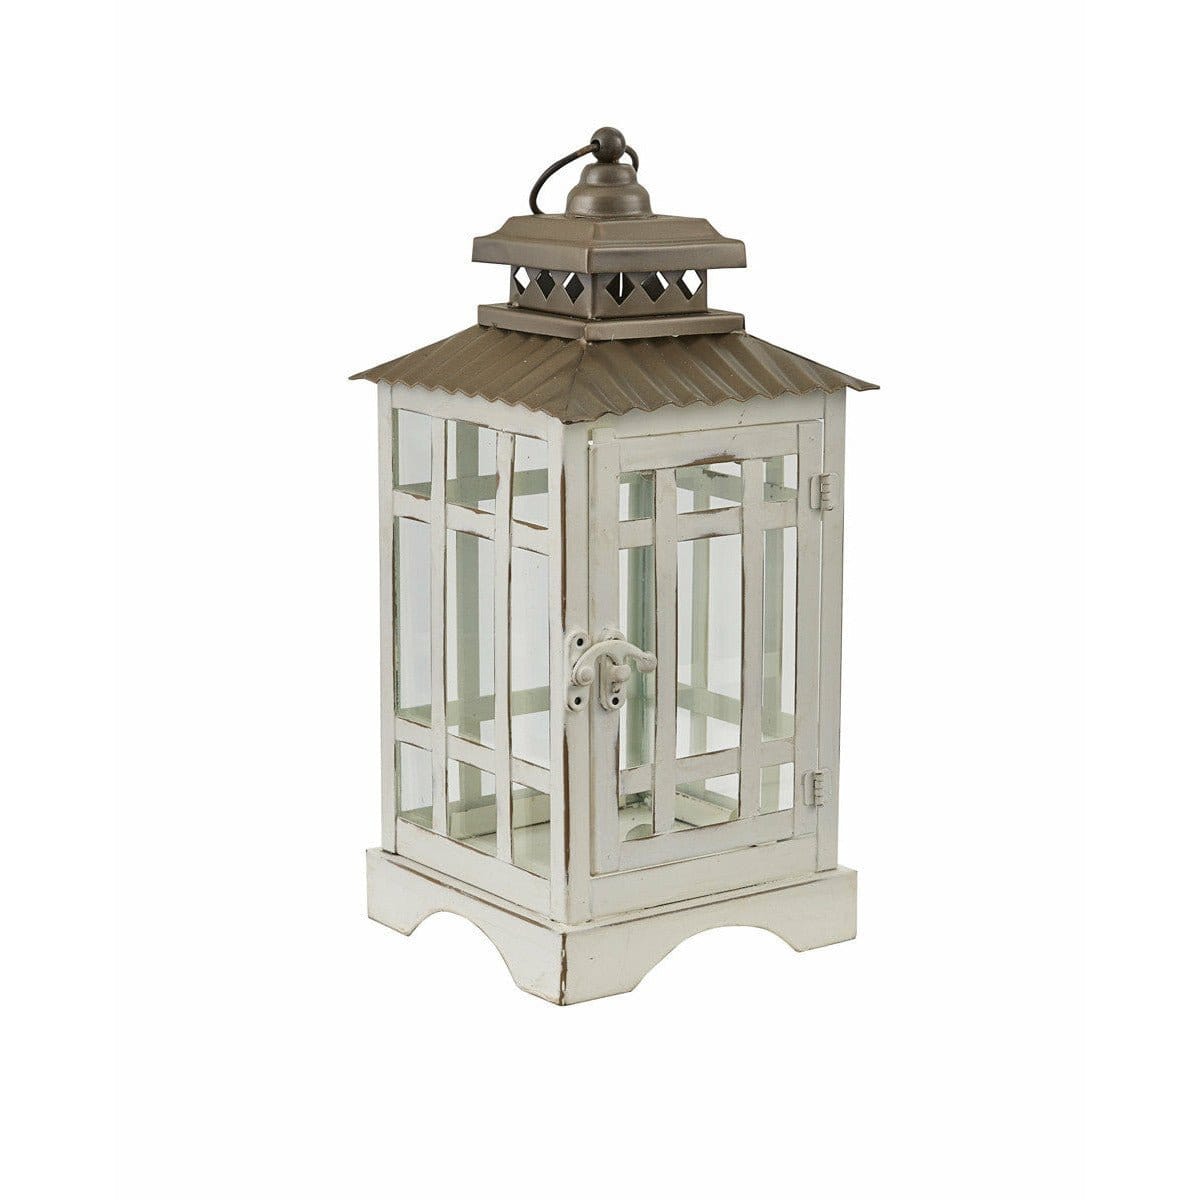 Distressed - Small White Lantern Candle Holder For Pillar Candles-Park Designs-The Village Merchant